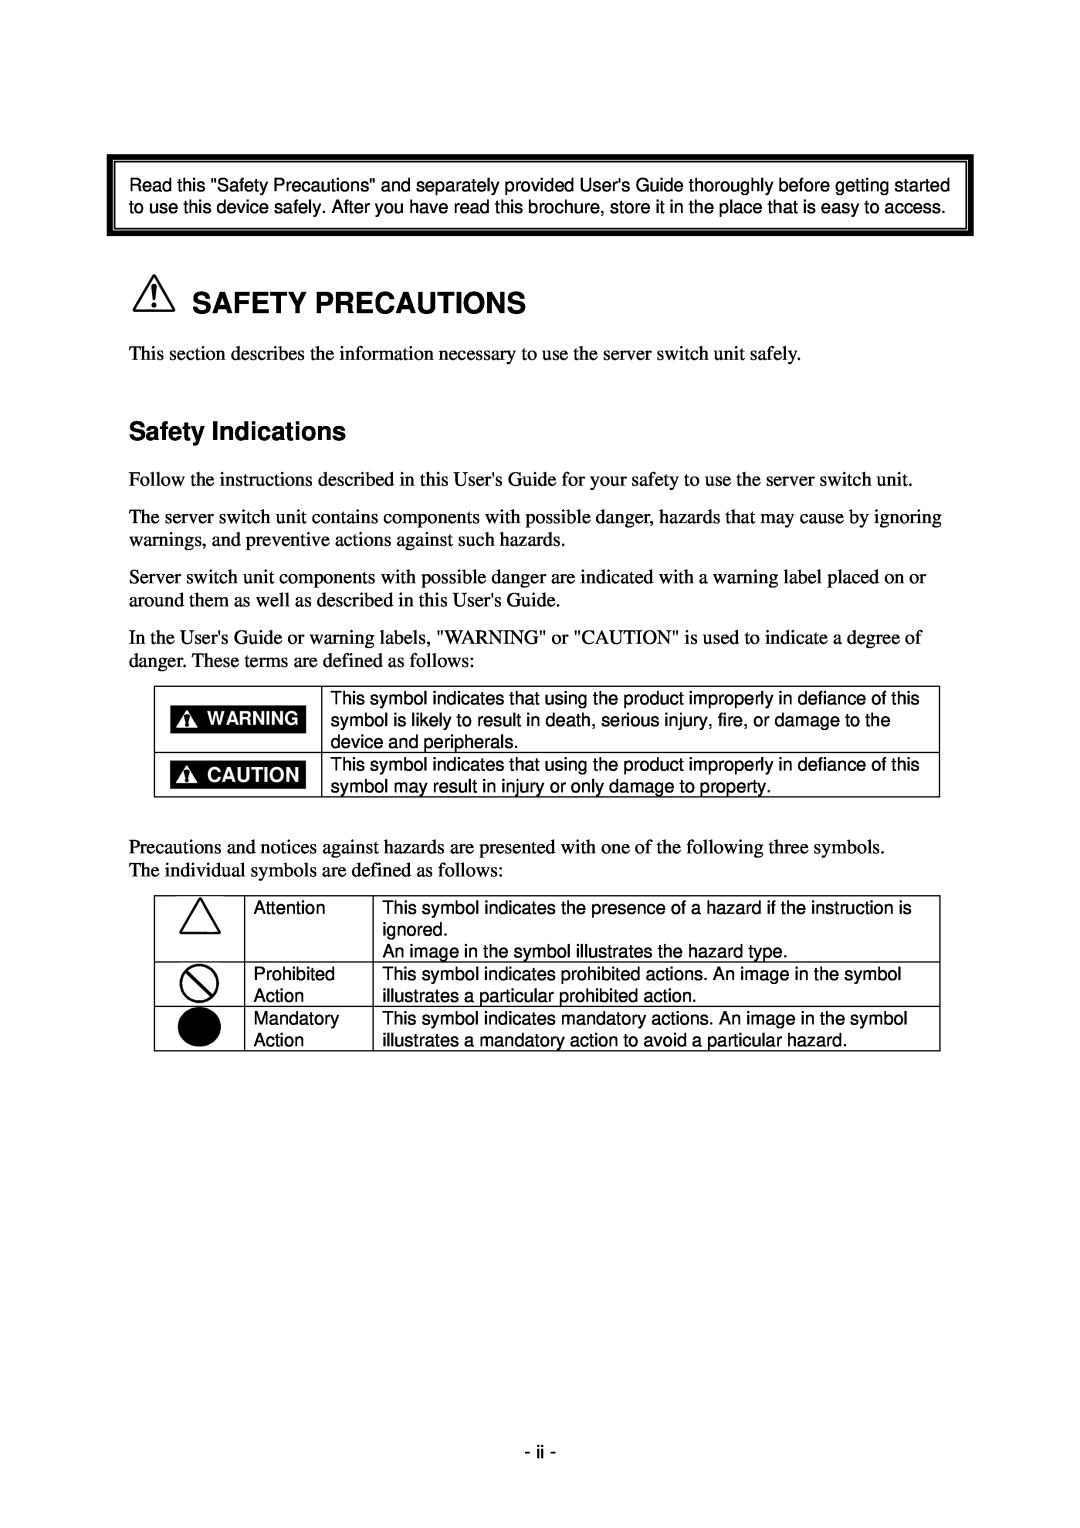 NEC N8191-09 manual Safety Precautions, Safety Indications 